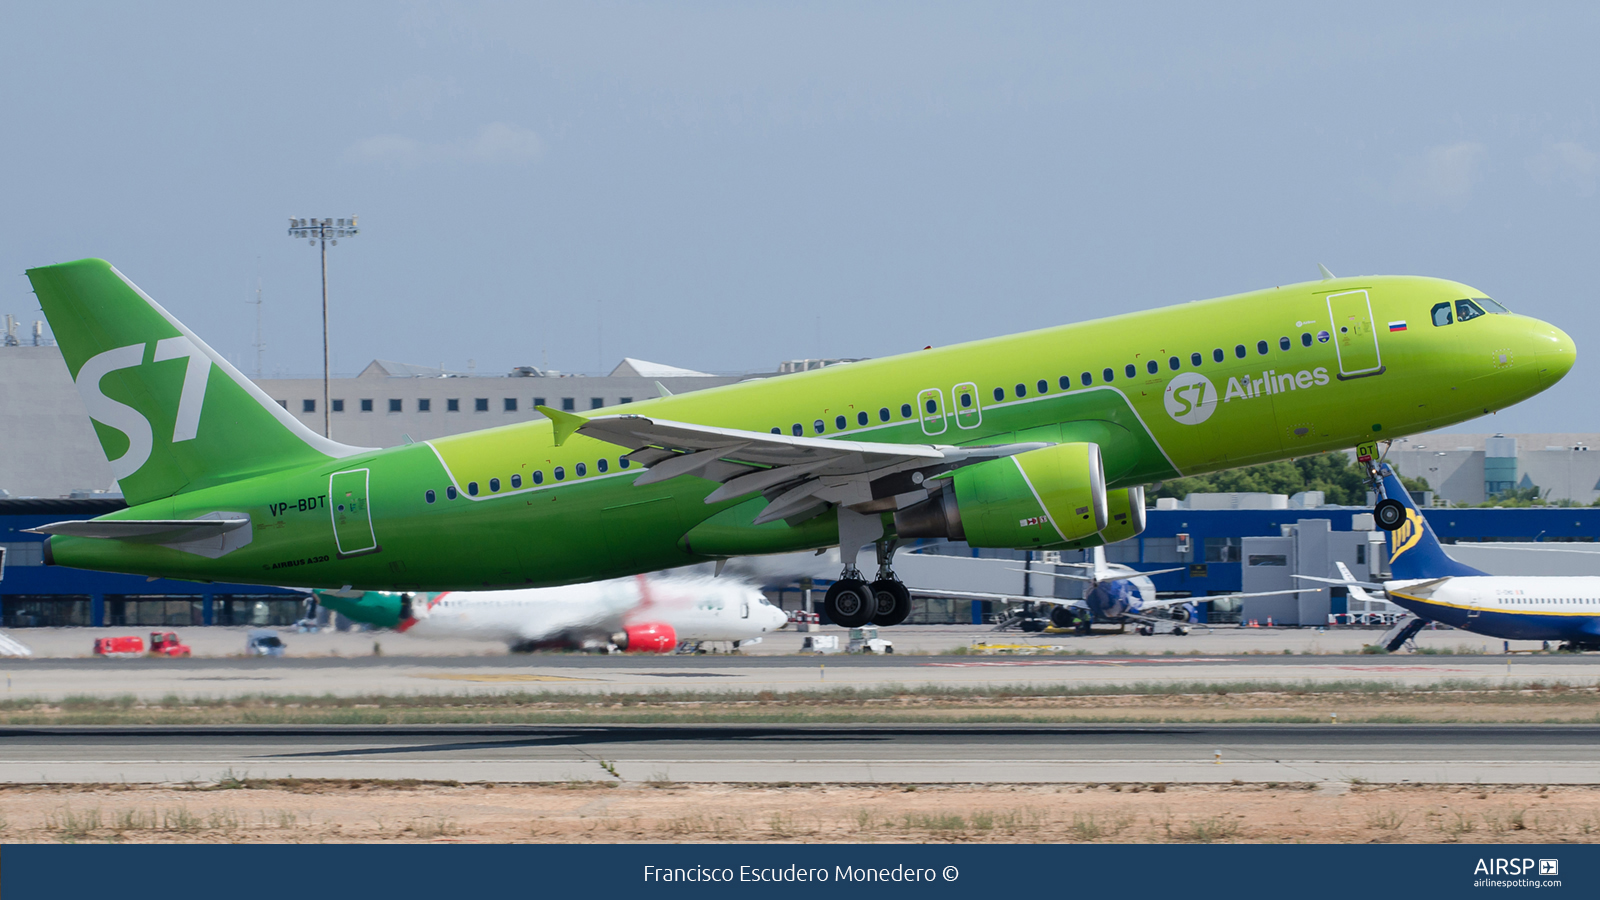 S7 Airlines  Airbus A320  VP-BDT